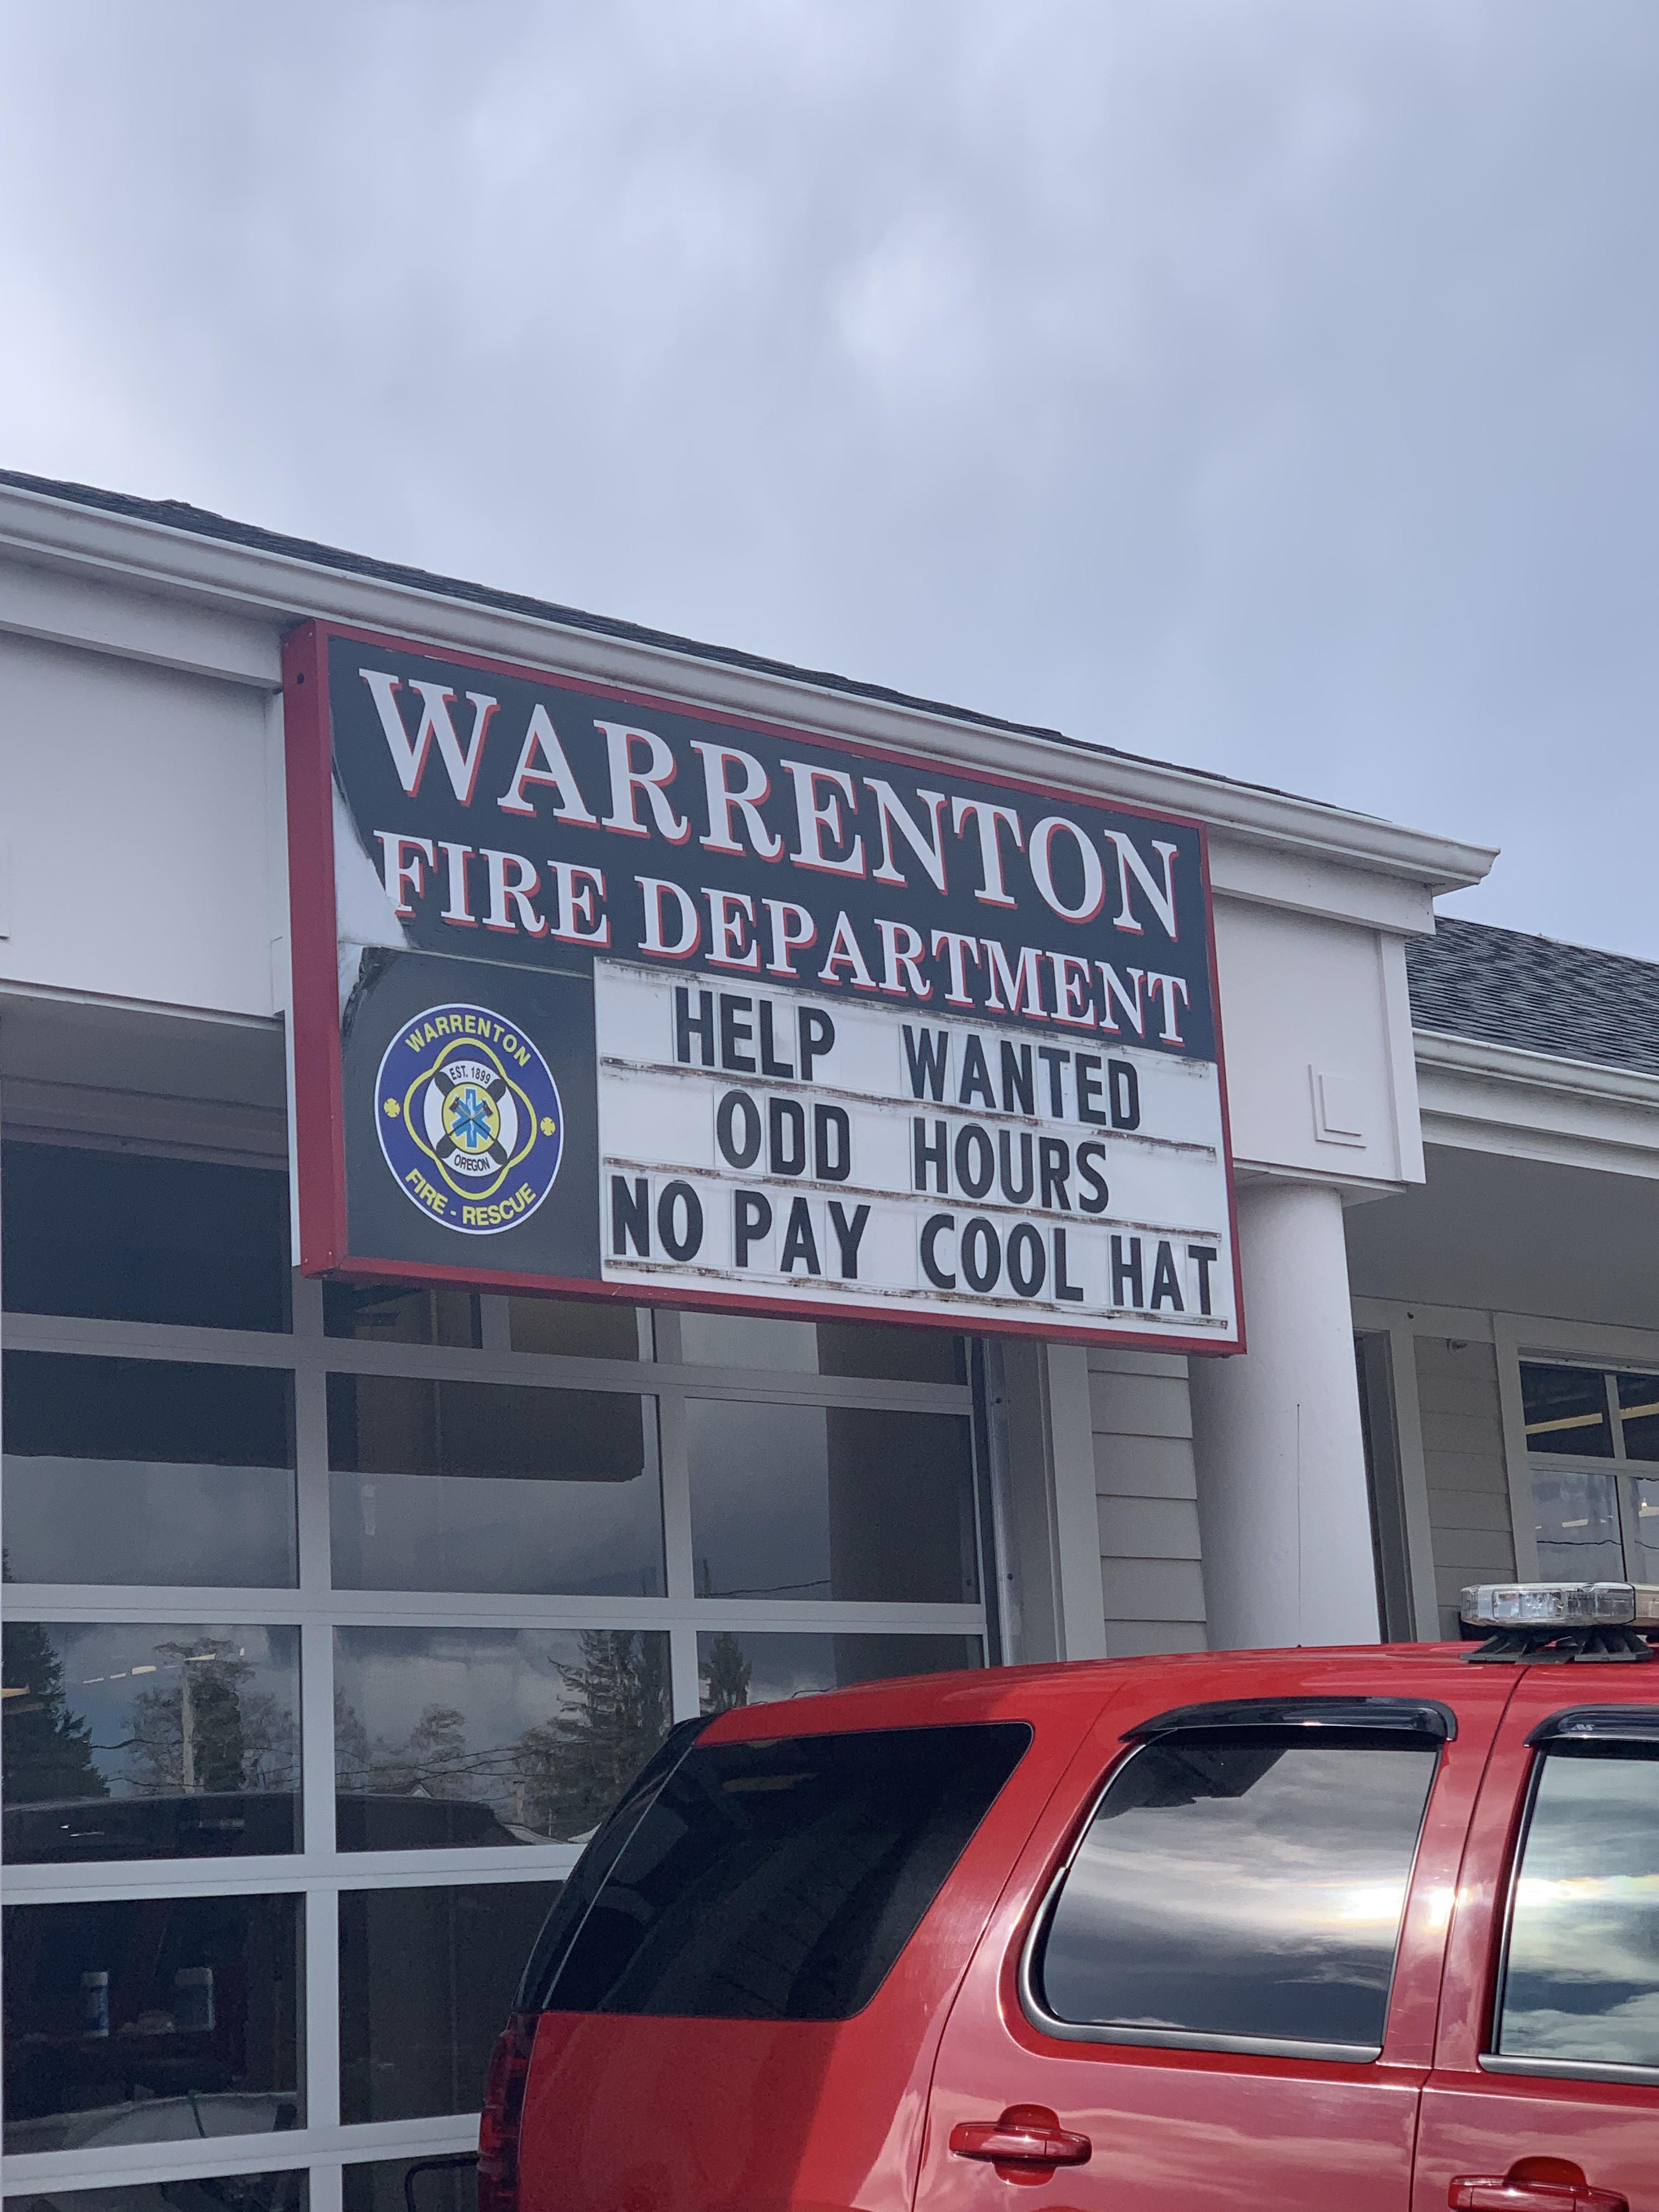 My local fire department makes a compelling offer